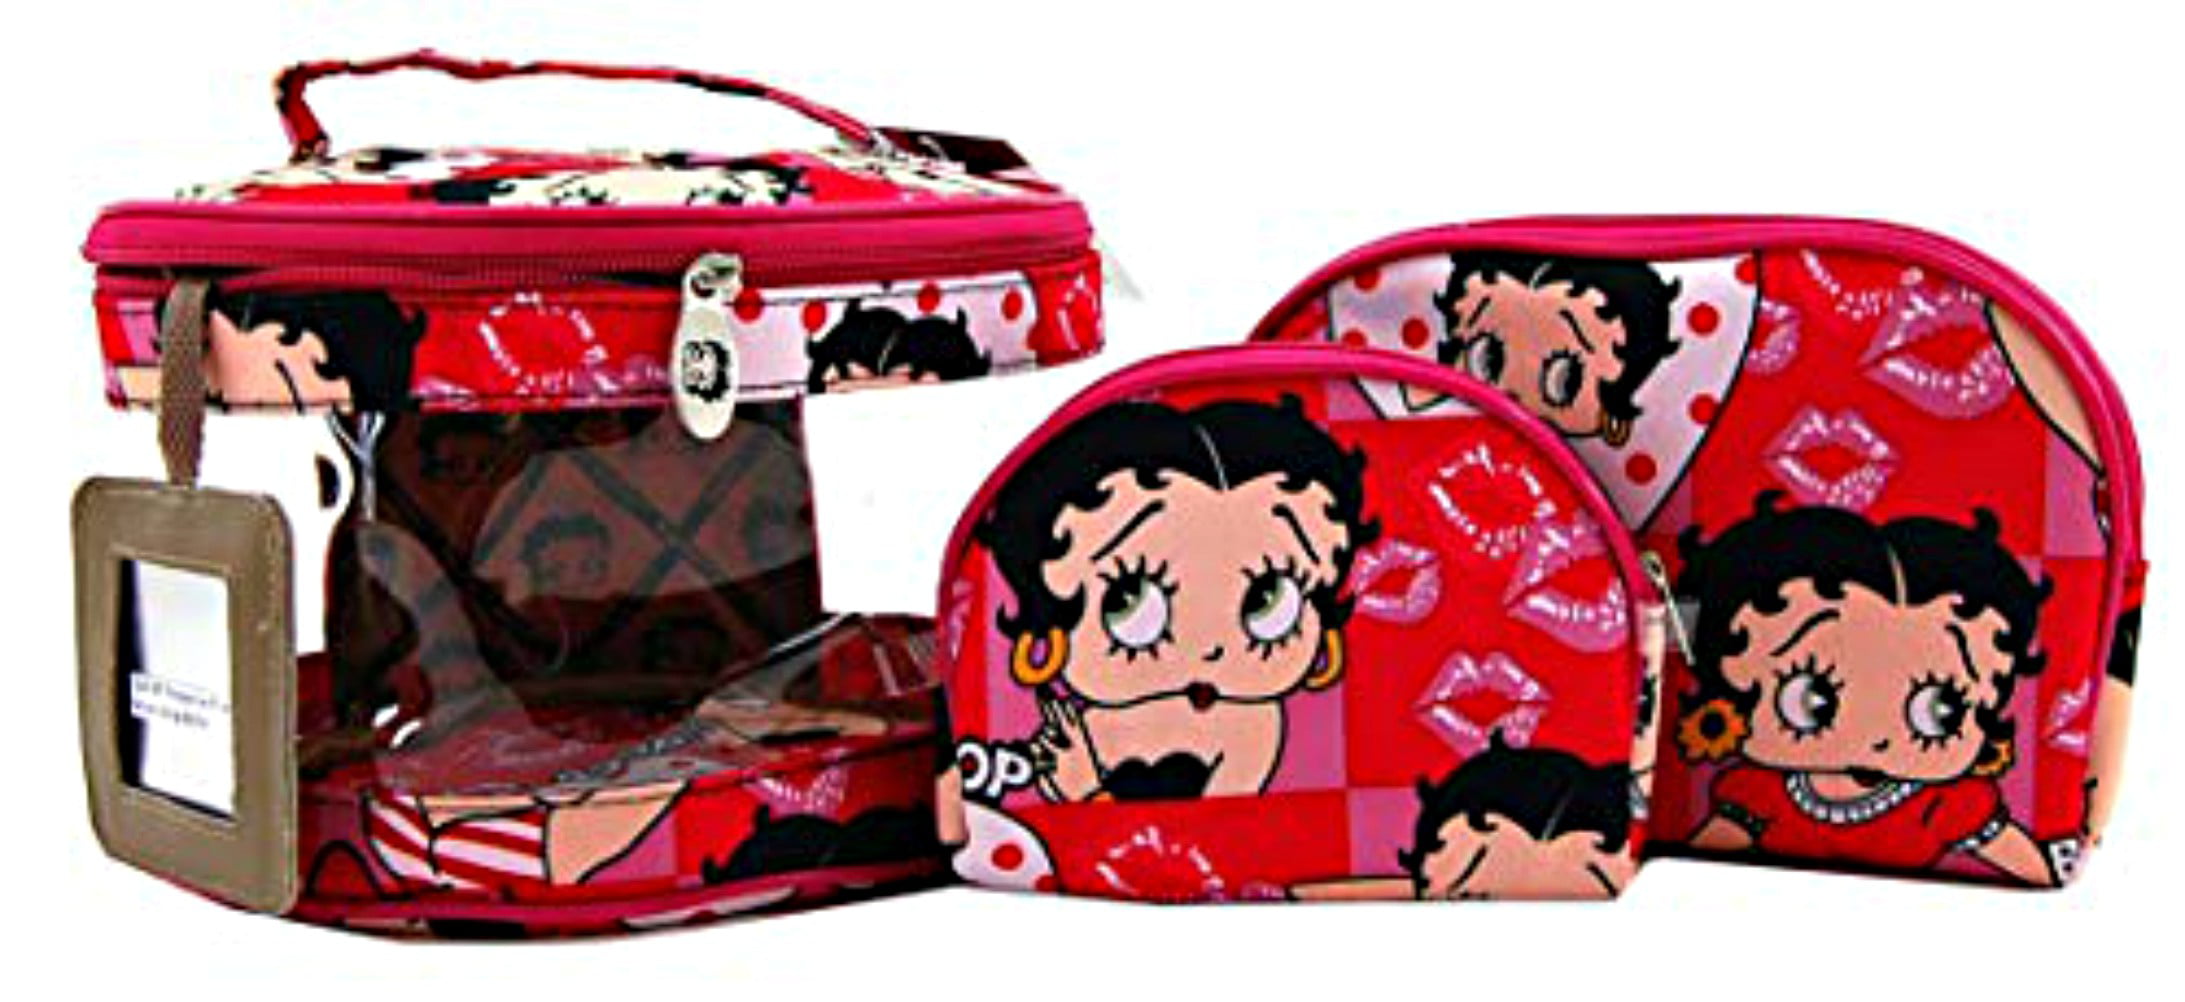 Betty Boop Small Clutch/Makeup Bag and Wallet Set 